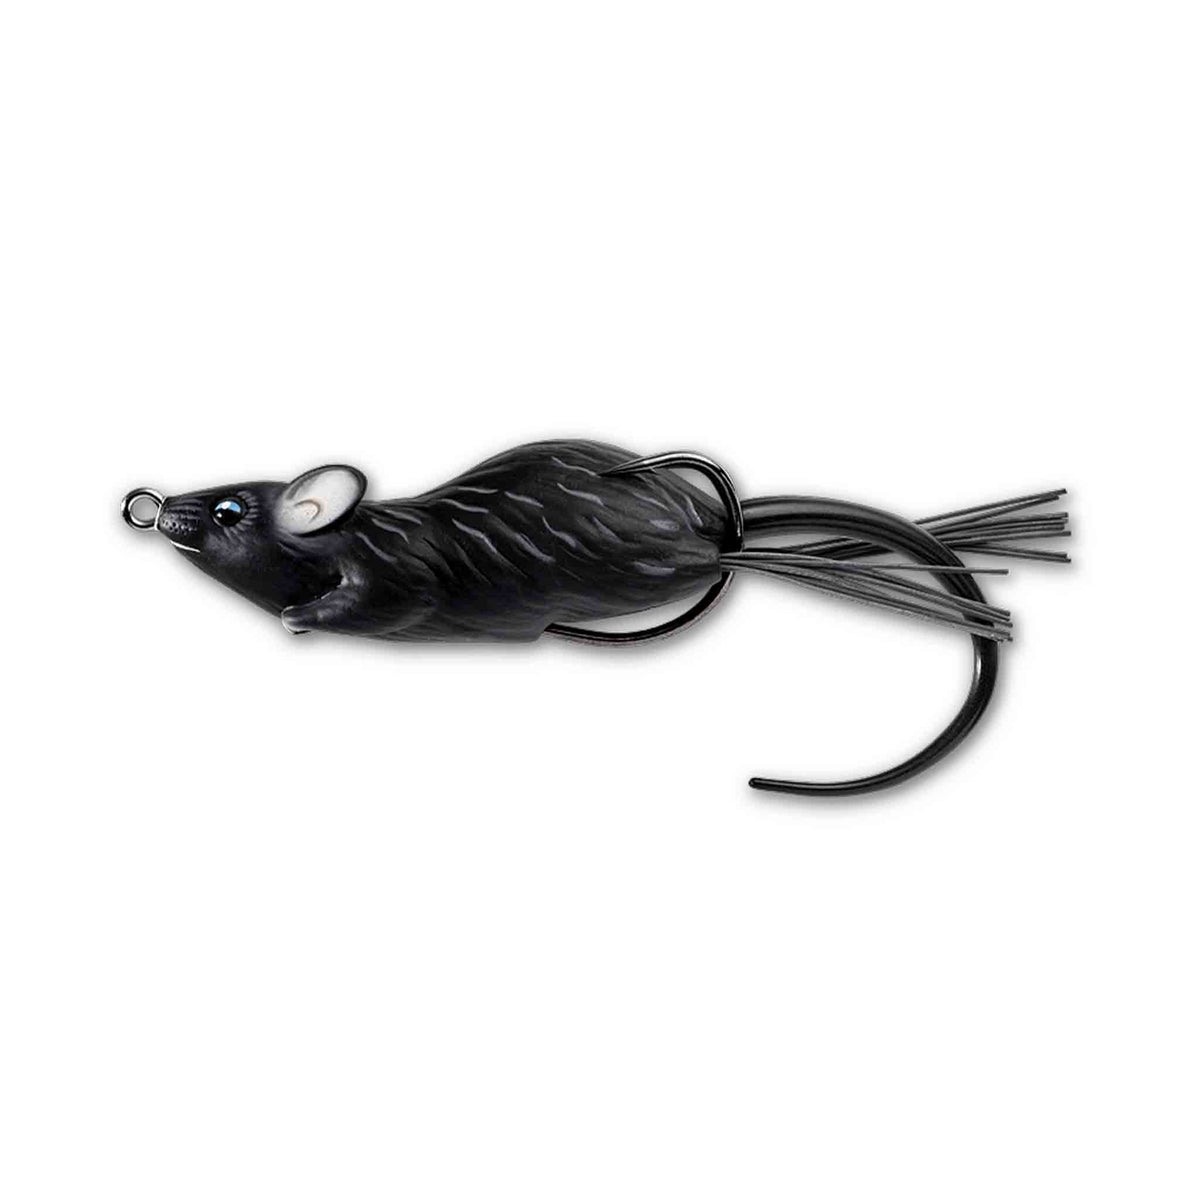 Live Target Hollow Body Mouse 3 1/2 Black / Black Topwater